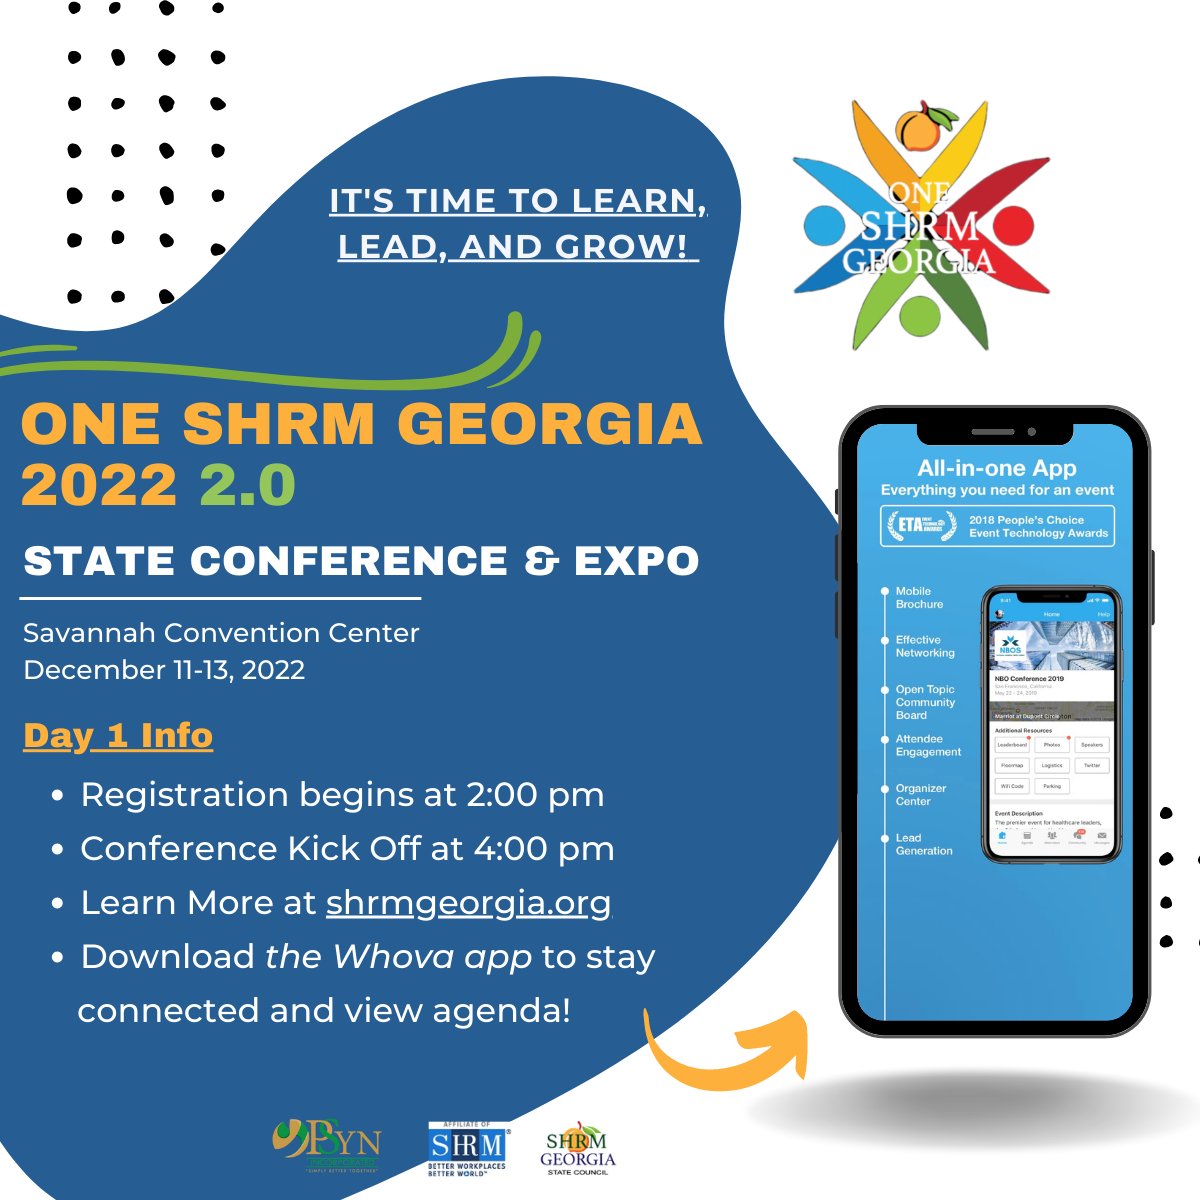 It's Time! We are excited to welcome you to the 2022 SHRM Georgia State Conference and Expo 2.0 - Together: Learn, Lead & Grow! Learn more at shrmgeorgia.org and download the Whova app today! #shrm #shrmgeorgia